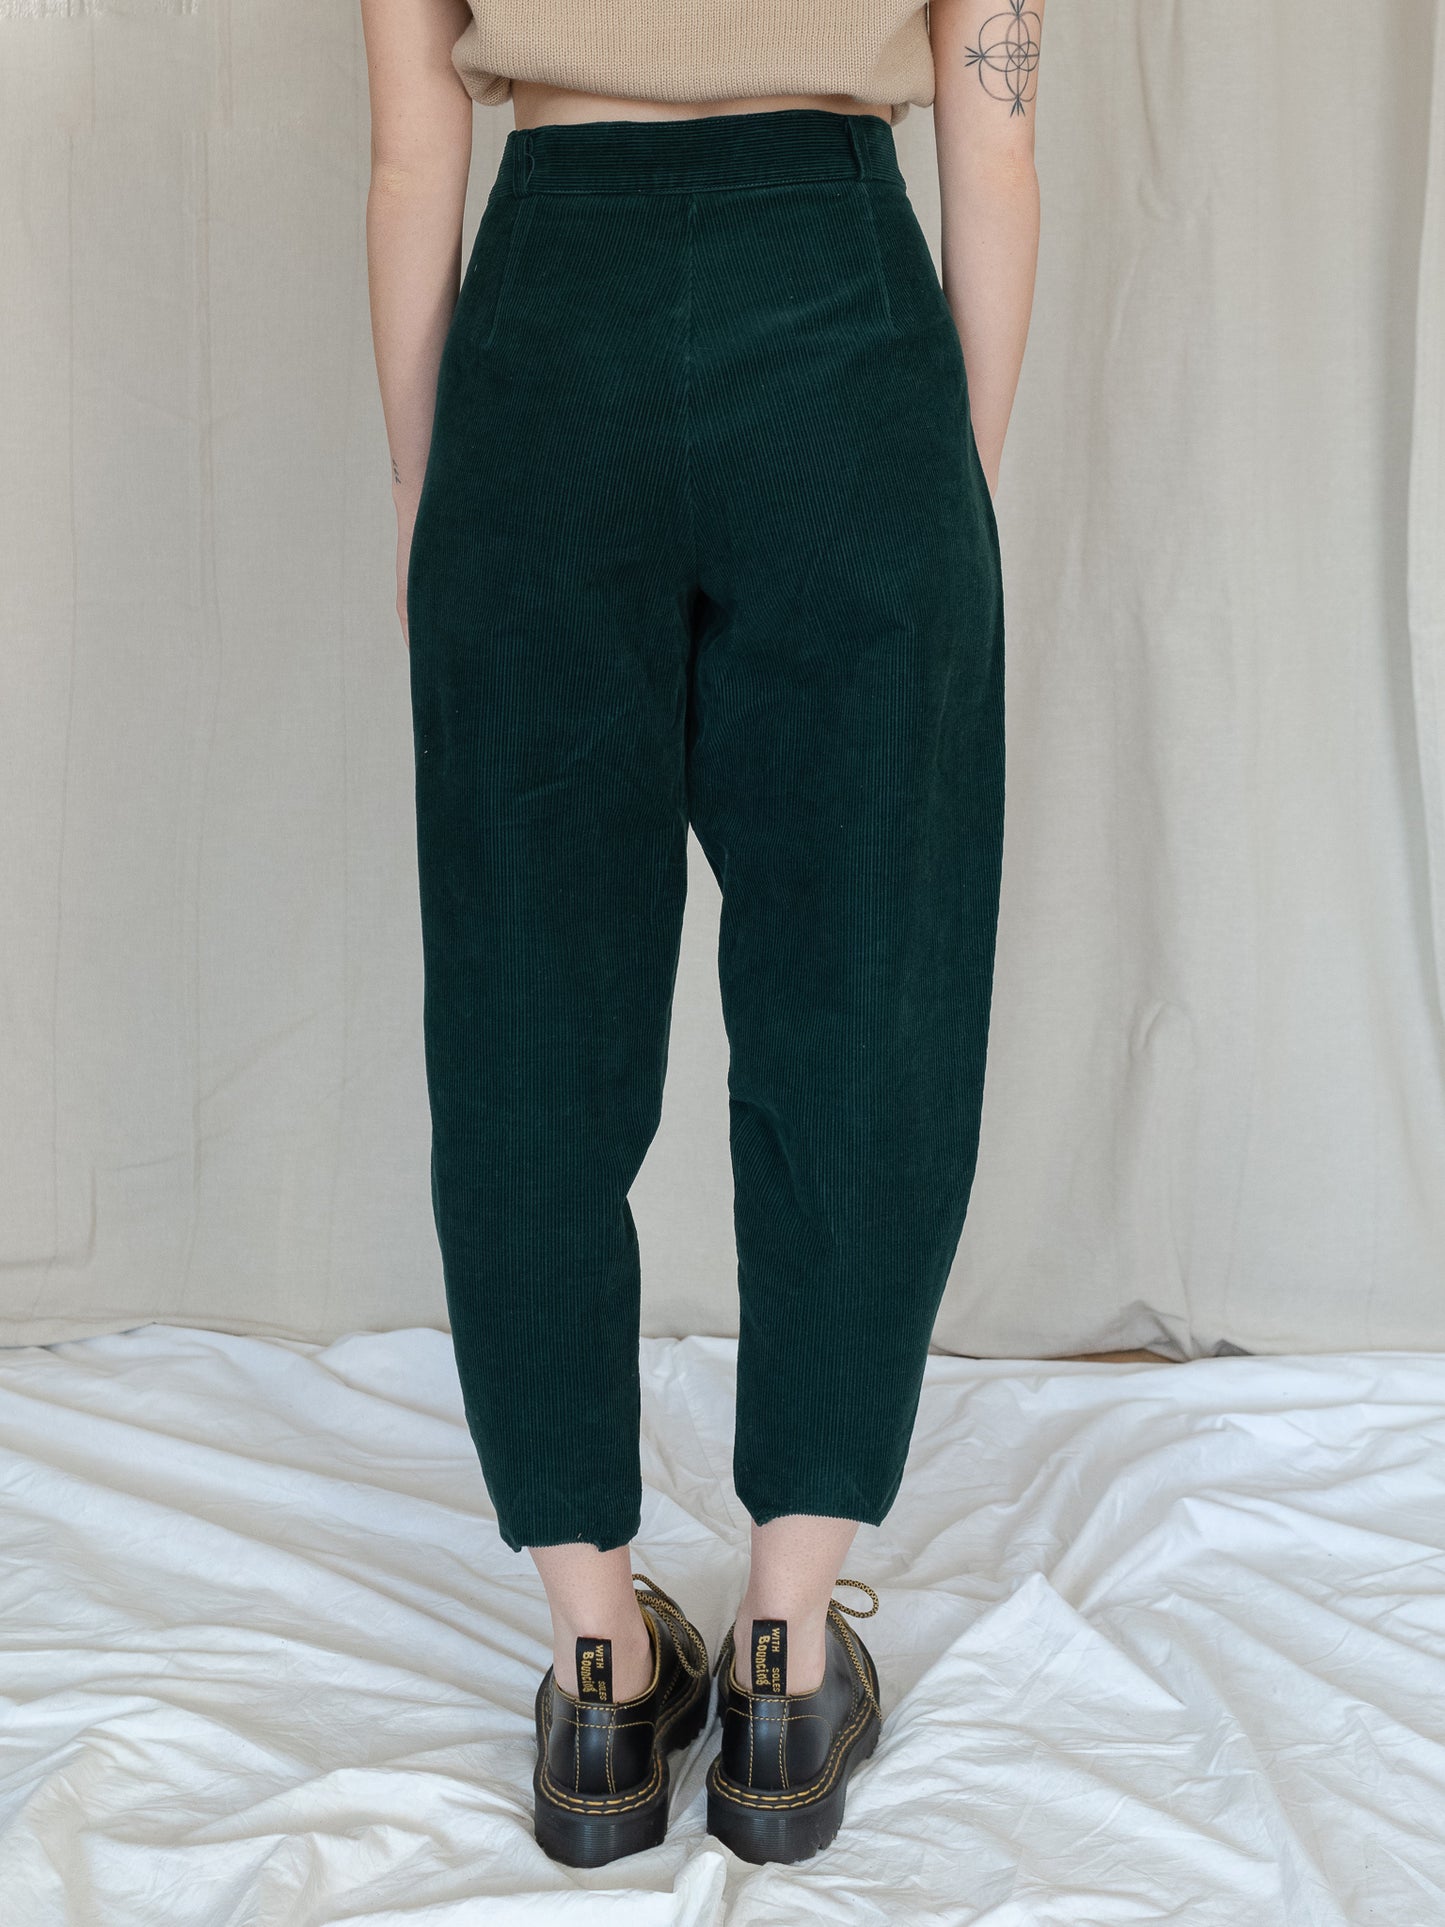 Vintage 80's Corduroy High Waisted Forest Green Pants (44EU)